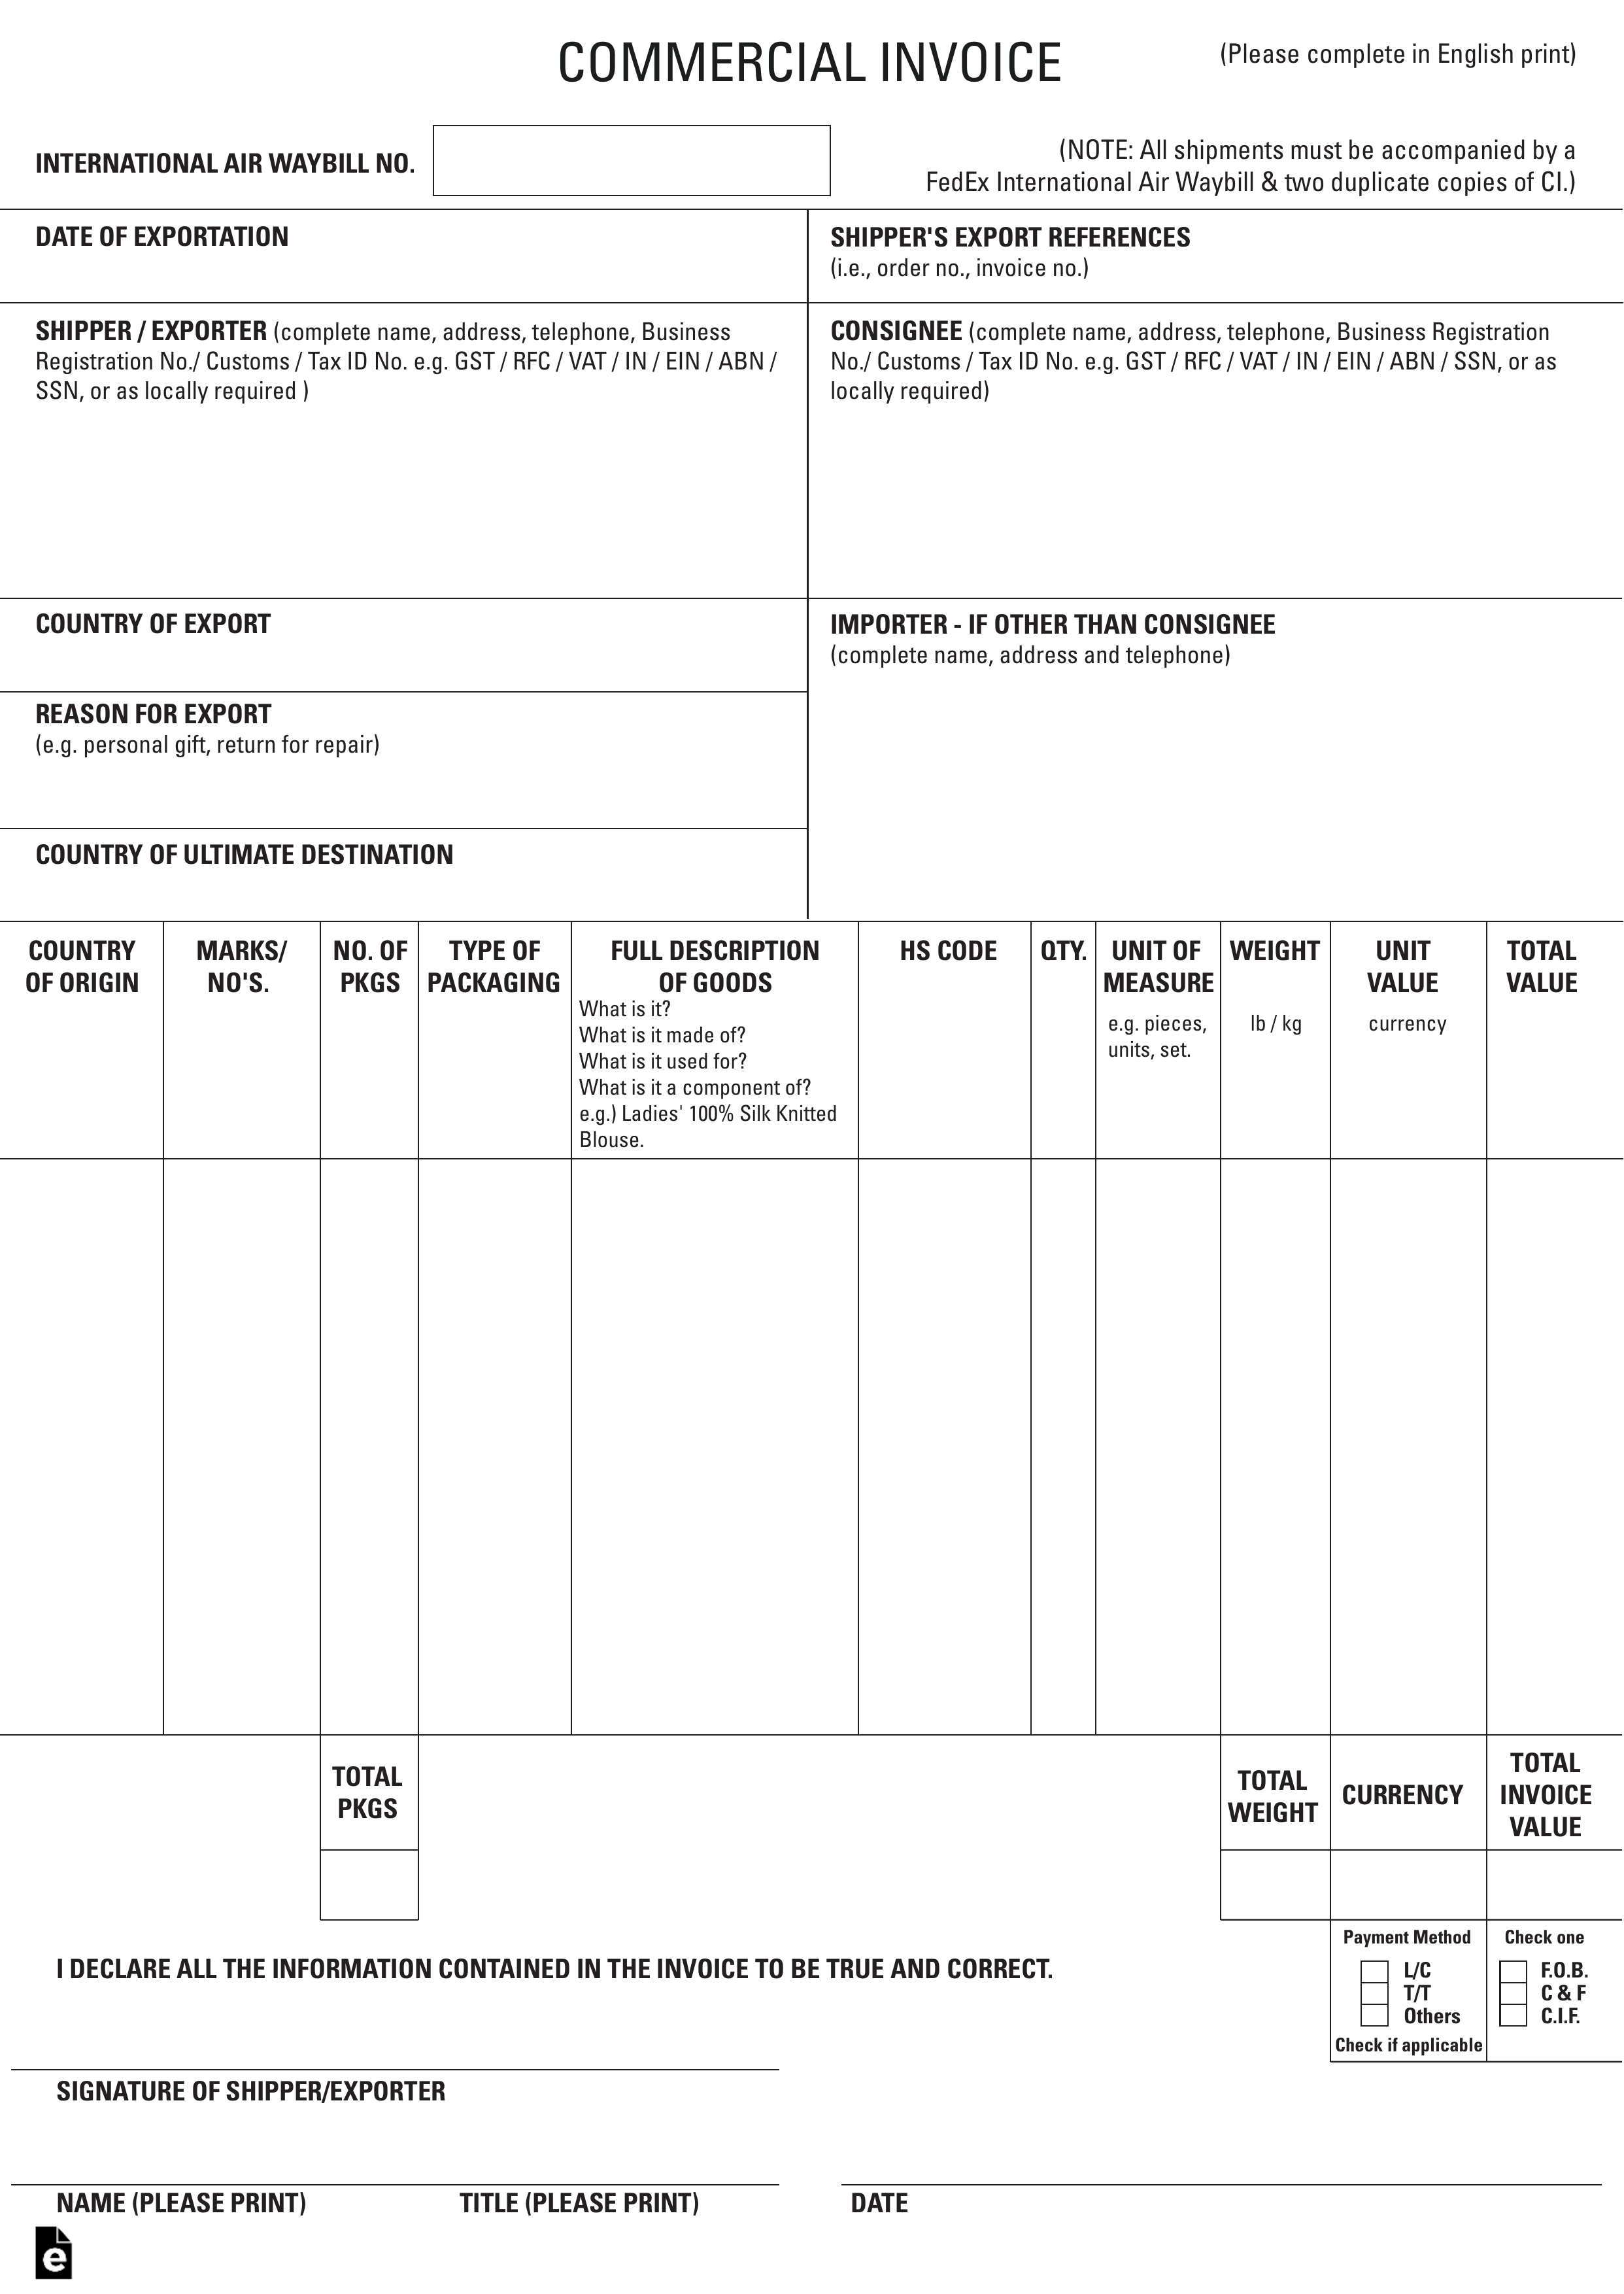 free international commercial invoice templates pdf commercial invoice for export sample